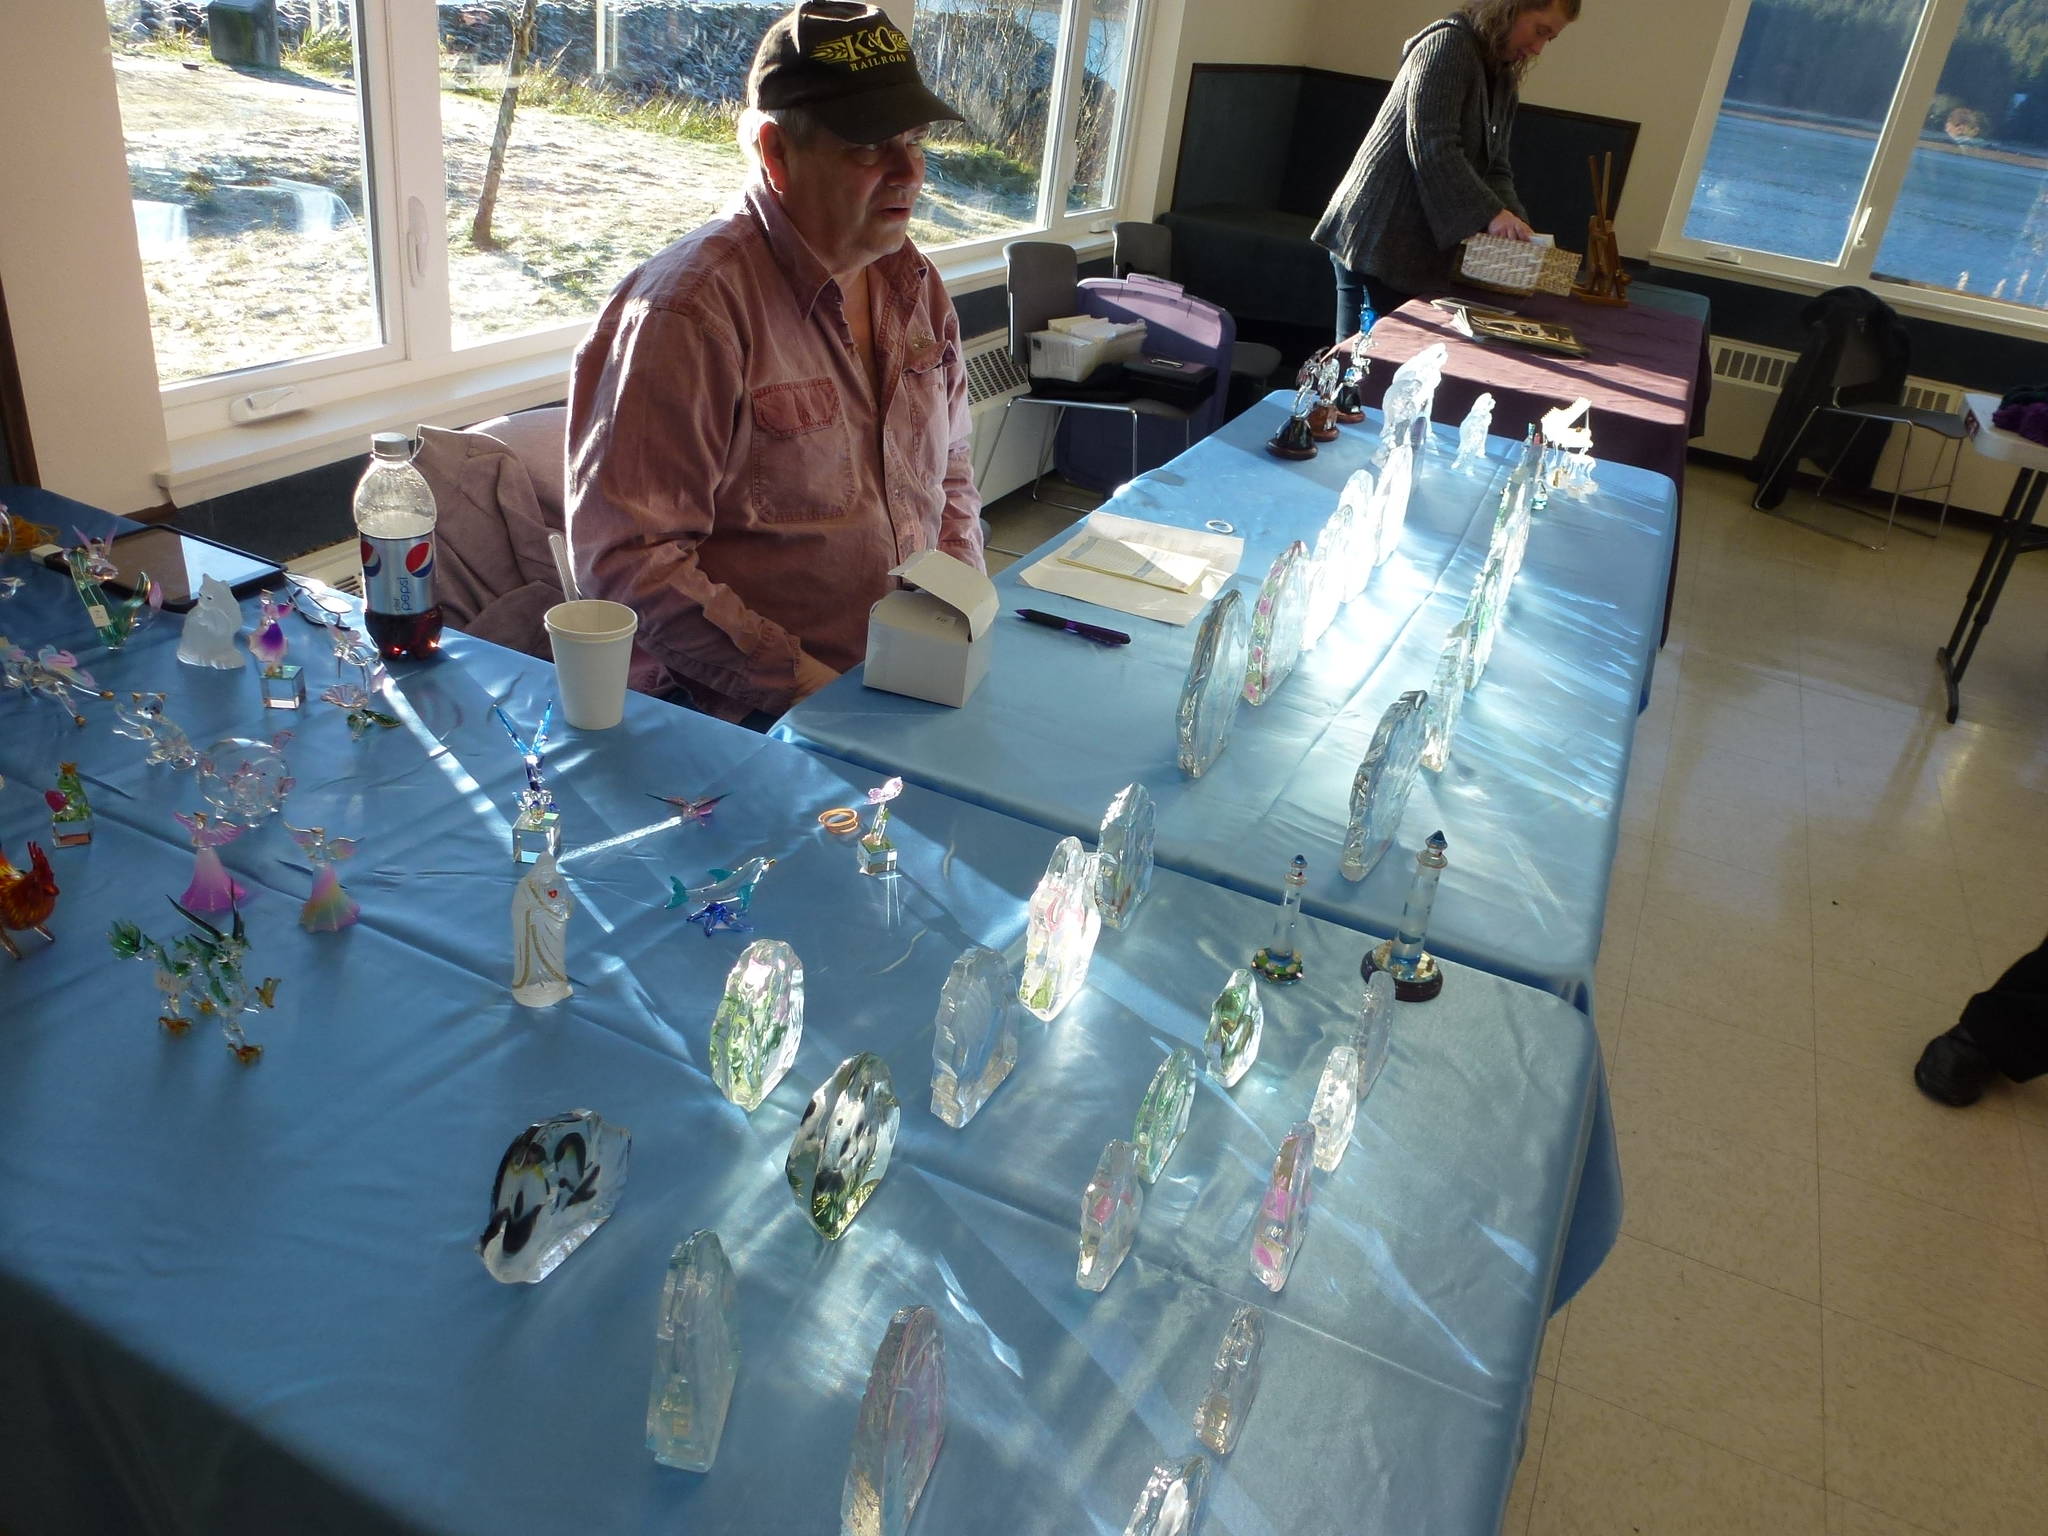 Robert Gibson, a glass blower from Skagway, shows off his wares at the 2013 Sons of Norway, Svalbard Lodge Holiday Bazaar in Juneau. This year’s bazaar is taking place this Saturday. (Photo courtesy of Elfrida Nord)